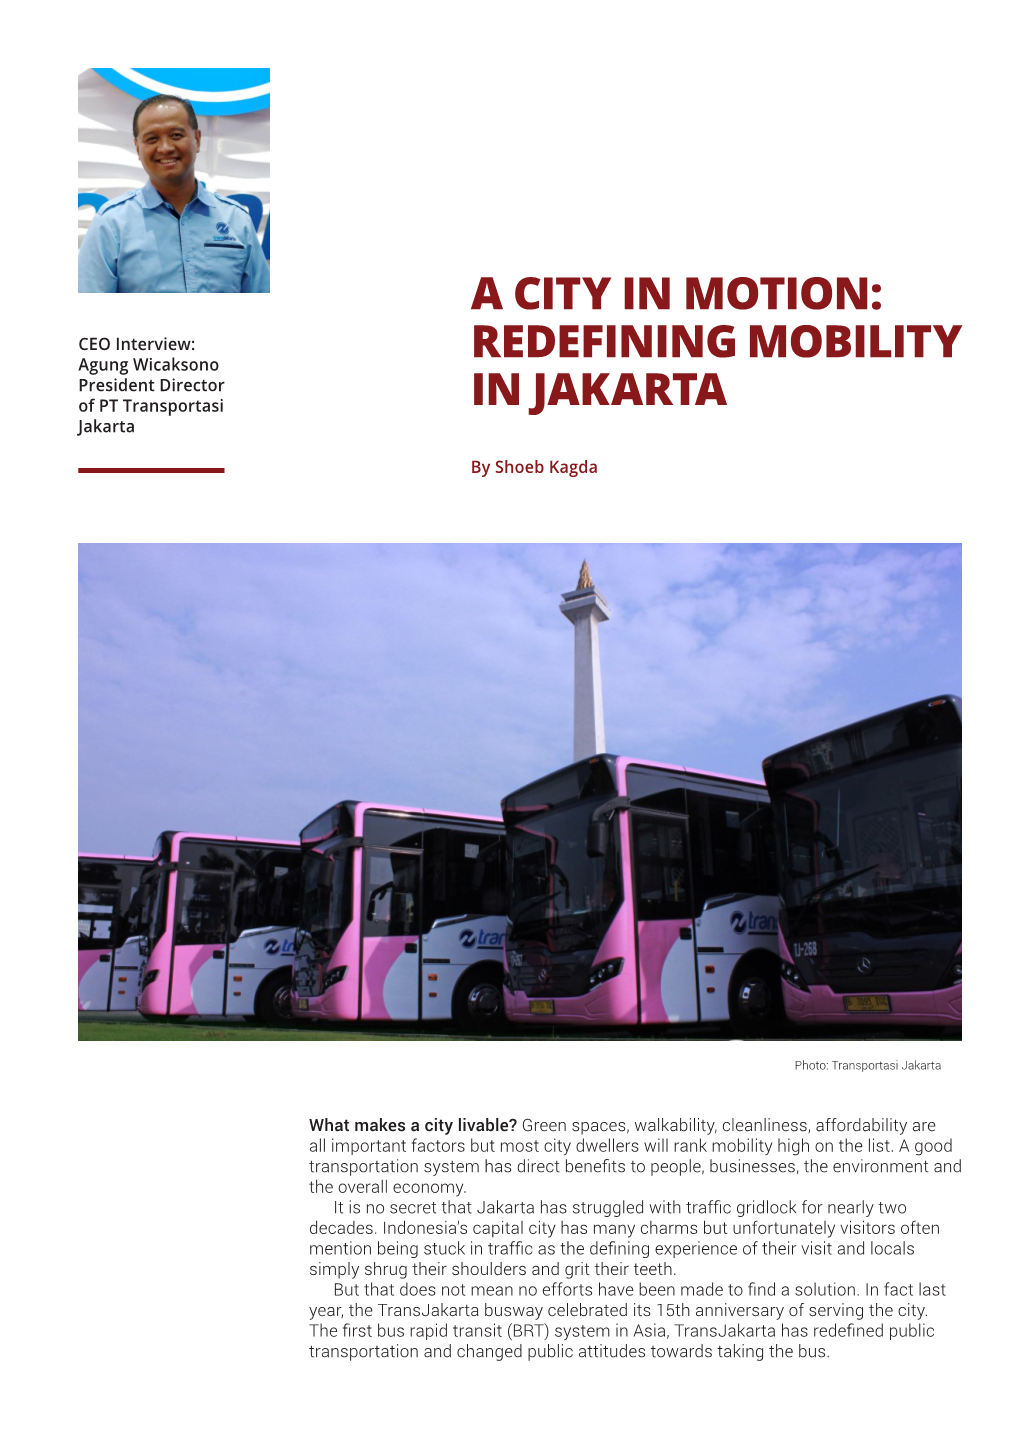 A City in Motion: Redefining Mobility in Jakarta